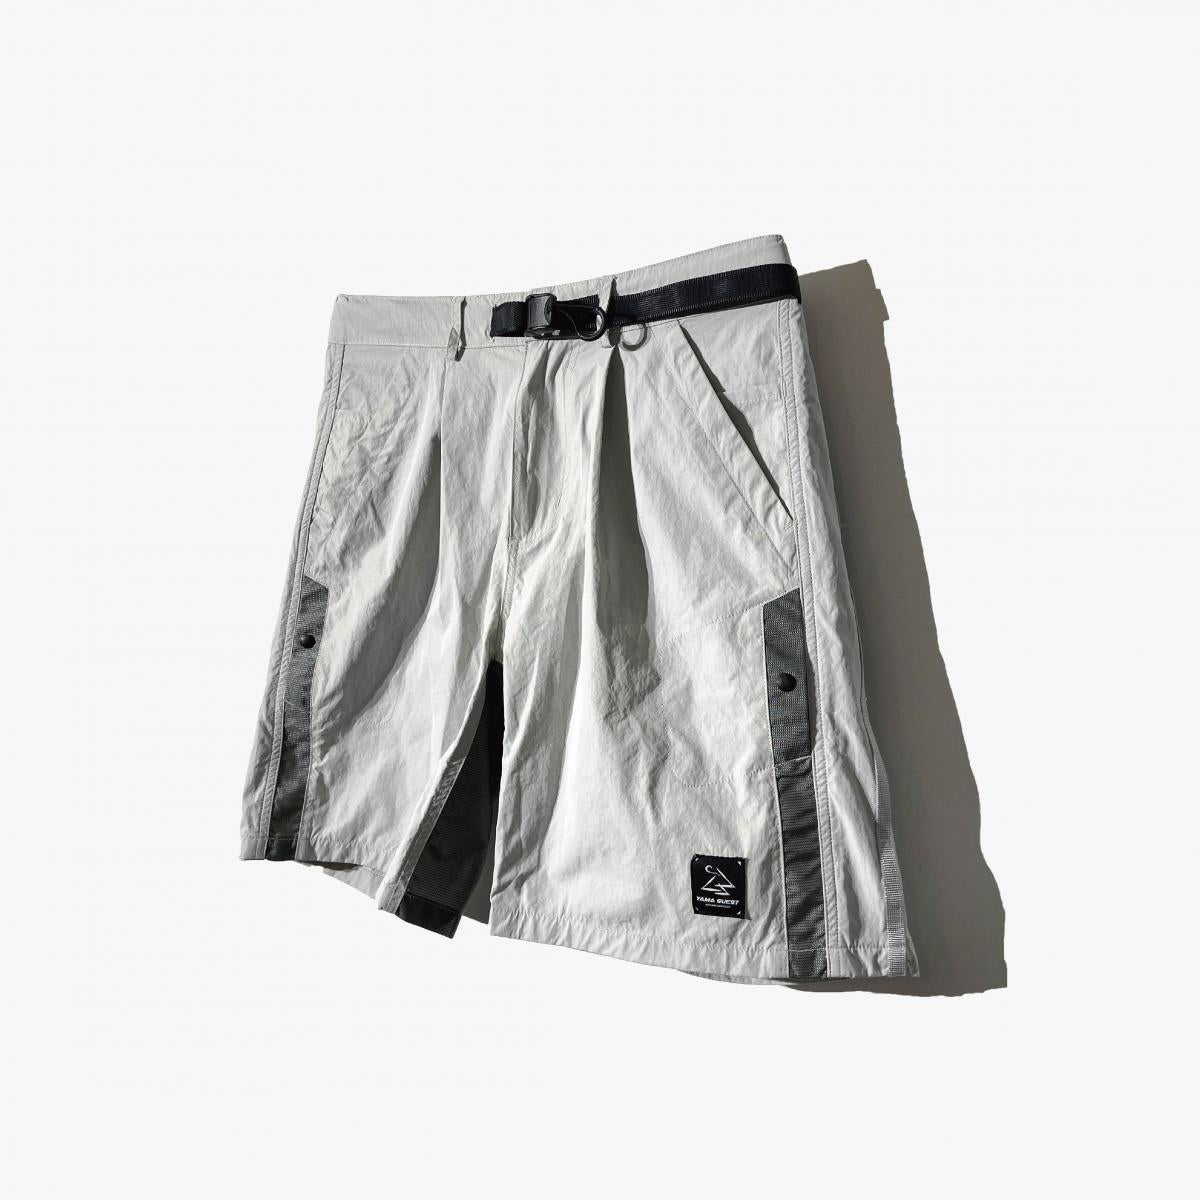 SP13 Wear-resistant breathable shorts (GYL)